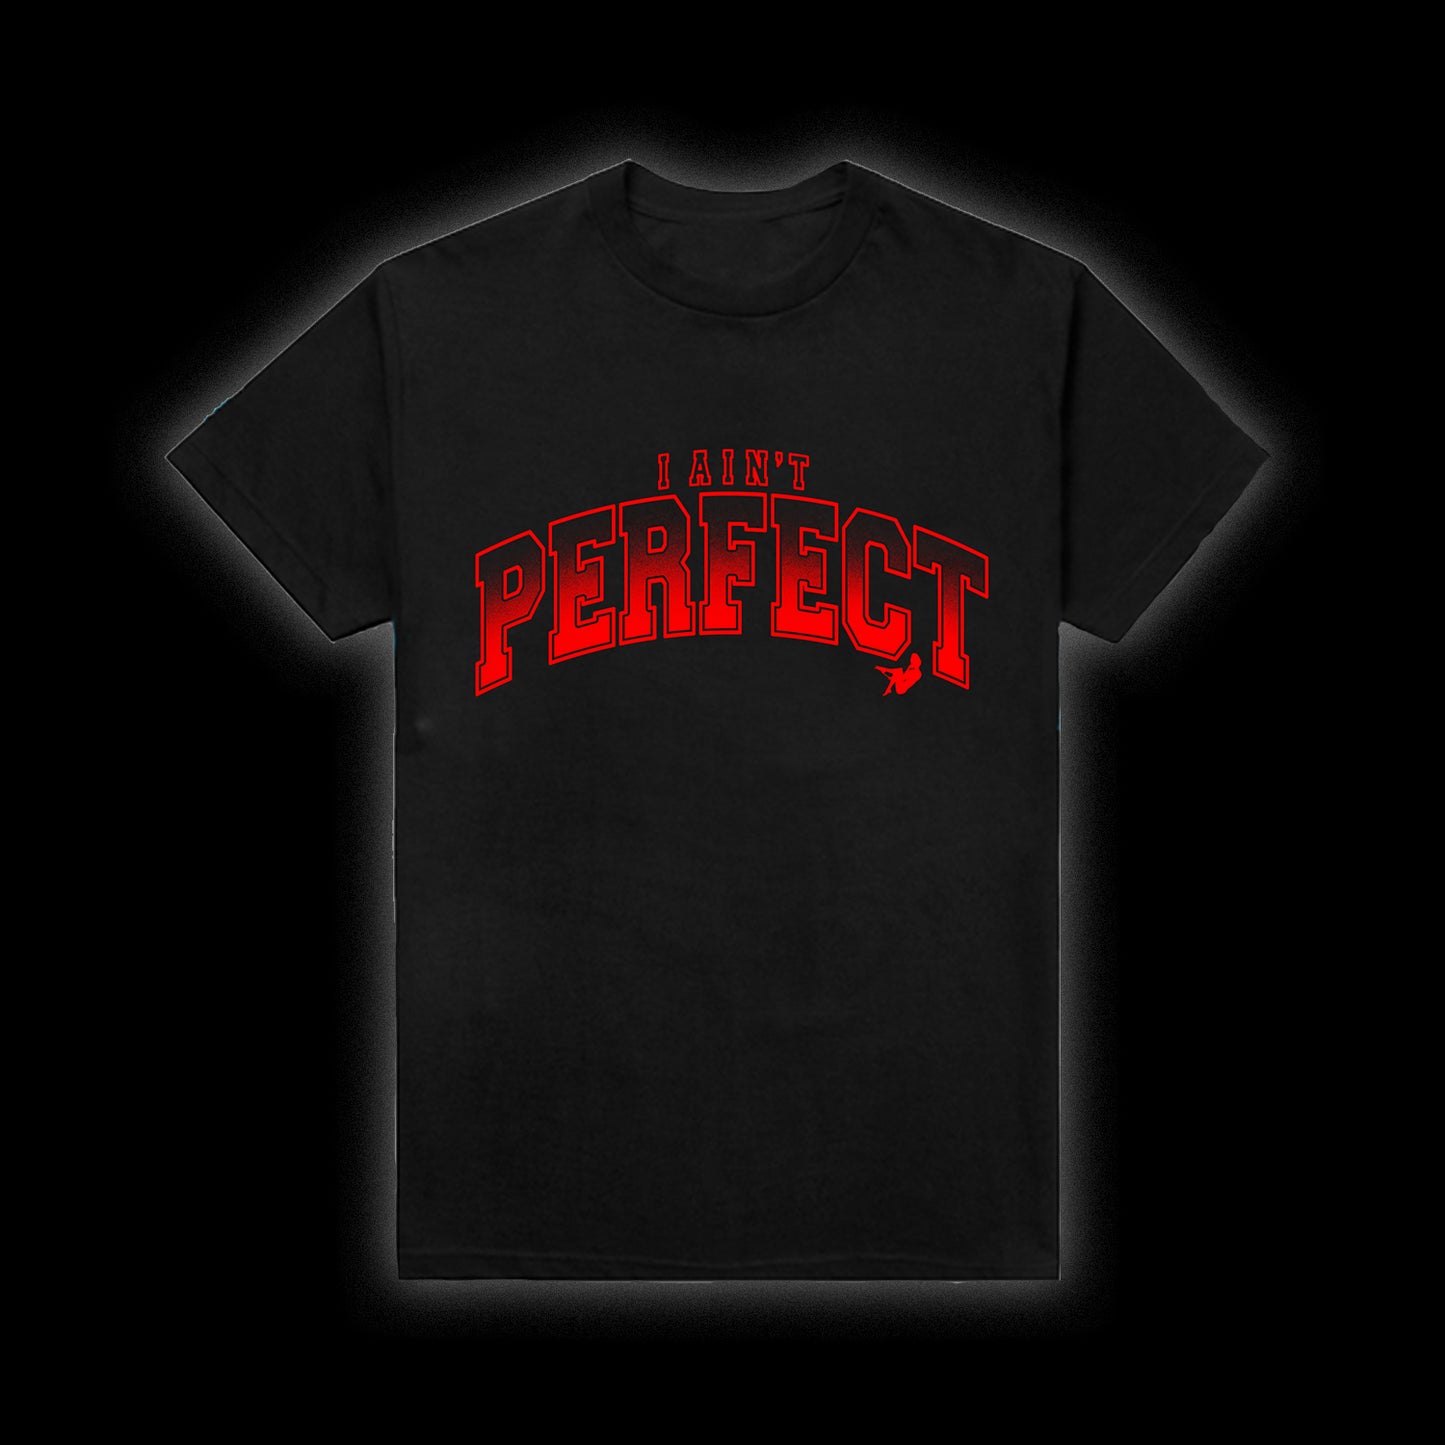 MOZZY - I Ain't Perfect Black Tee + Download